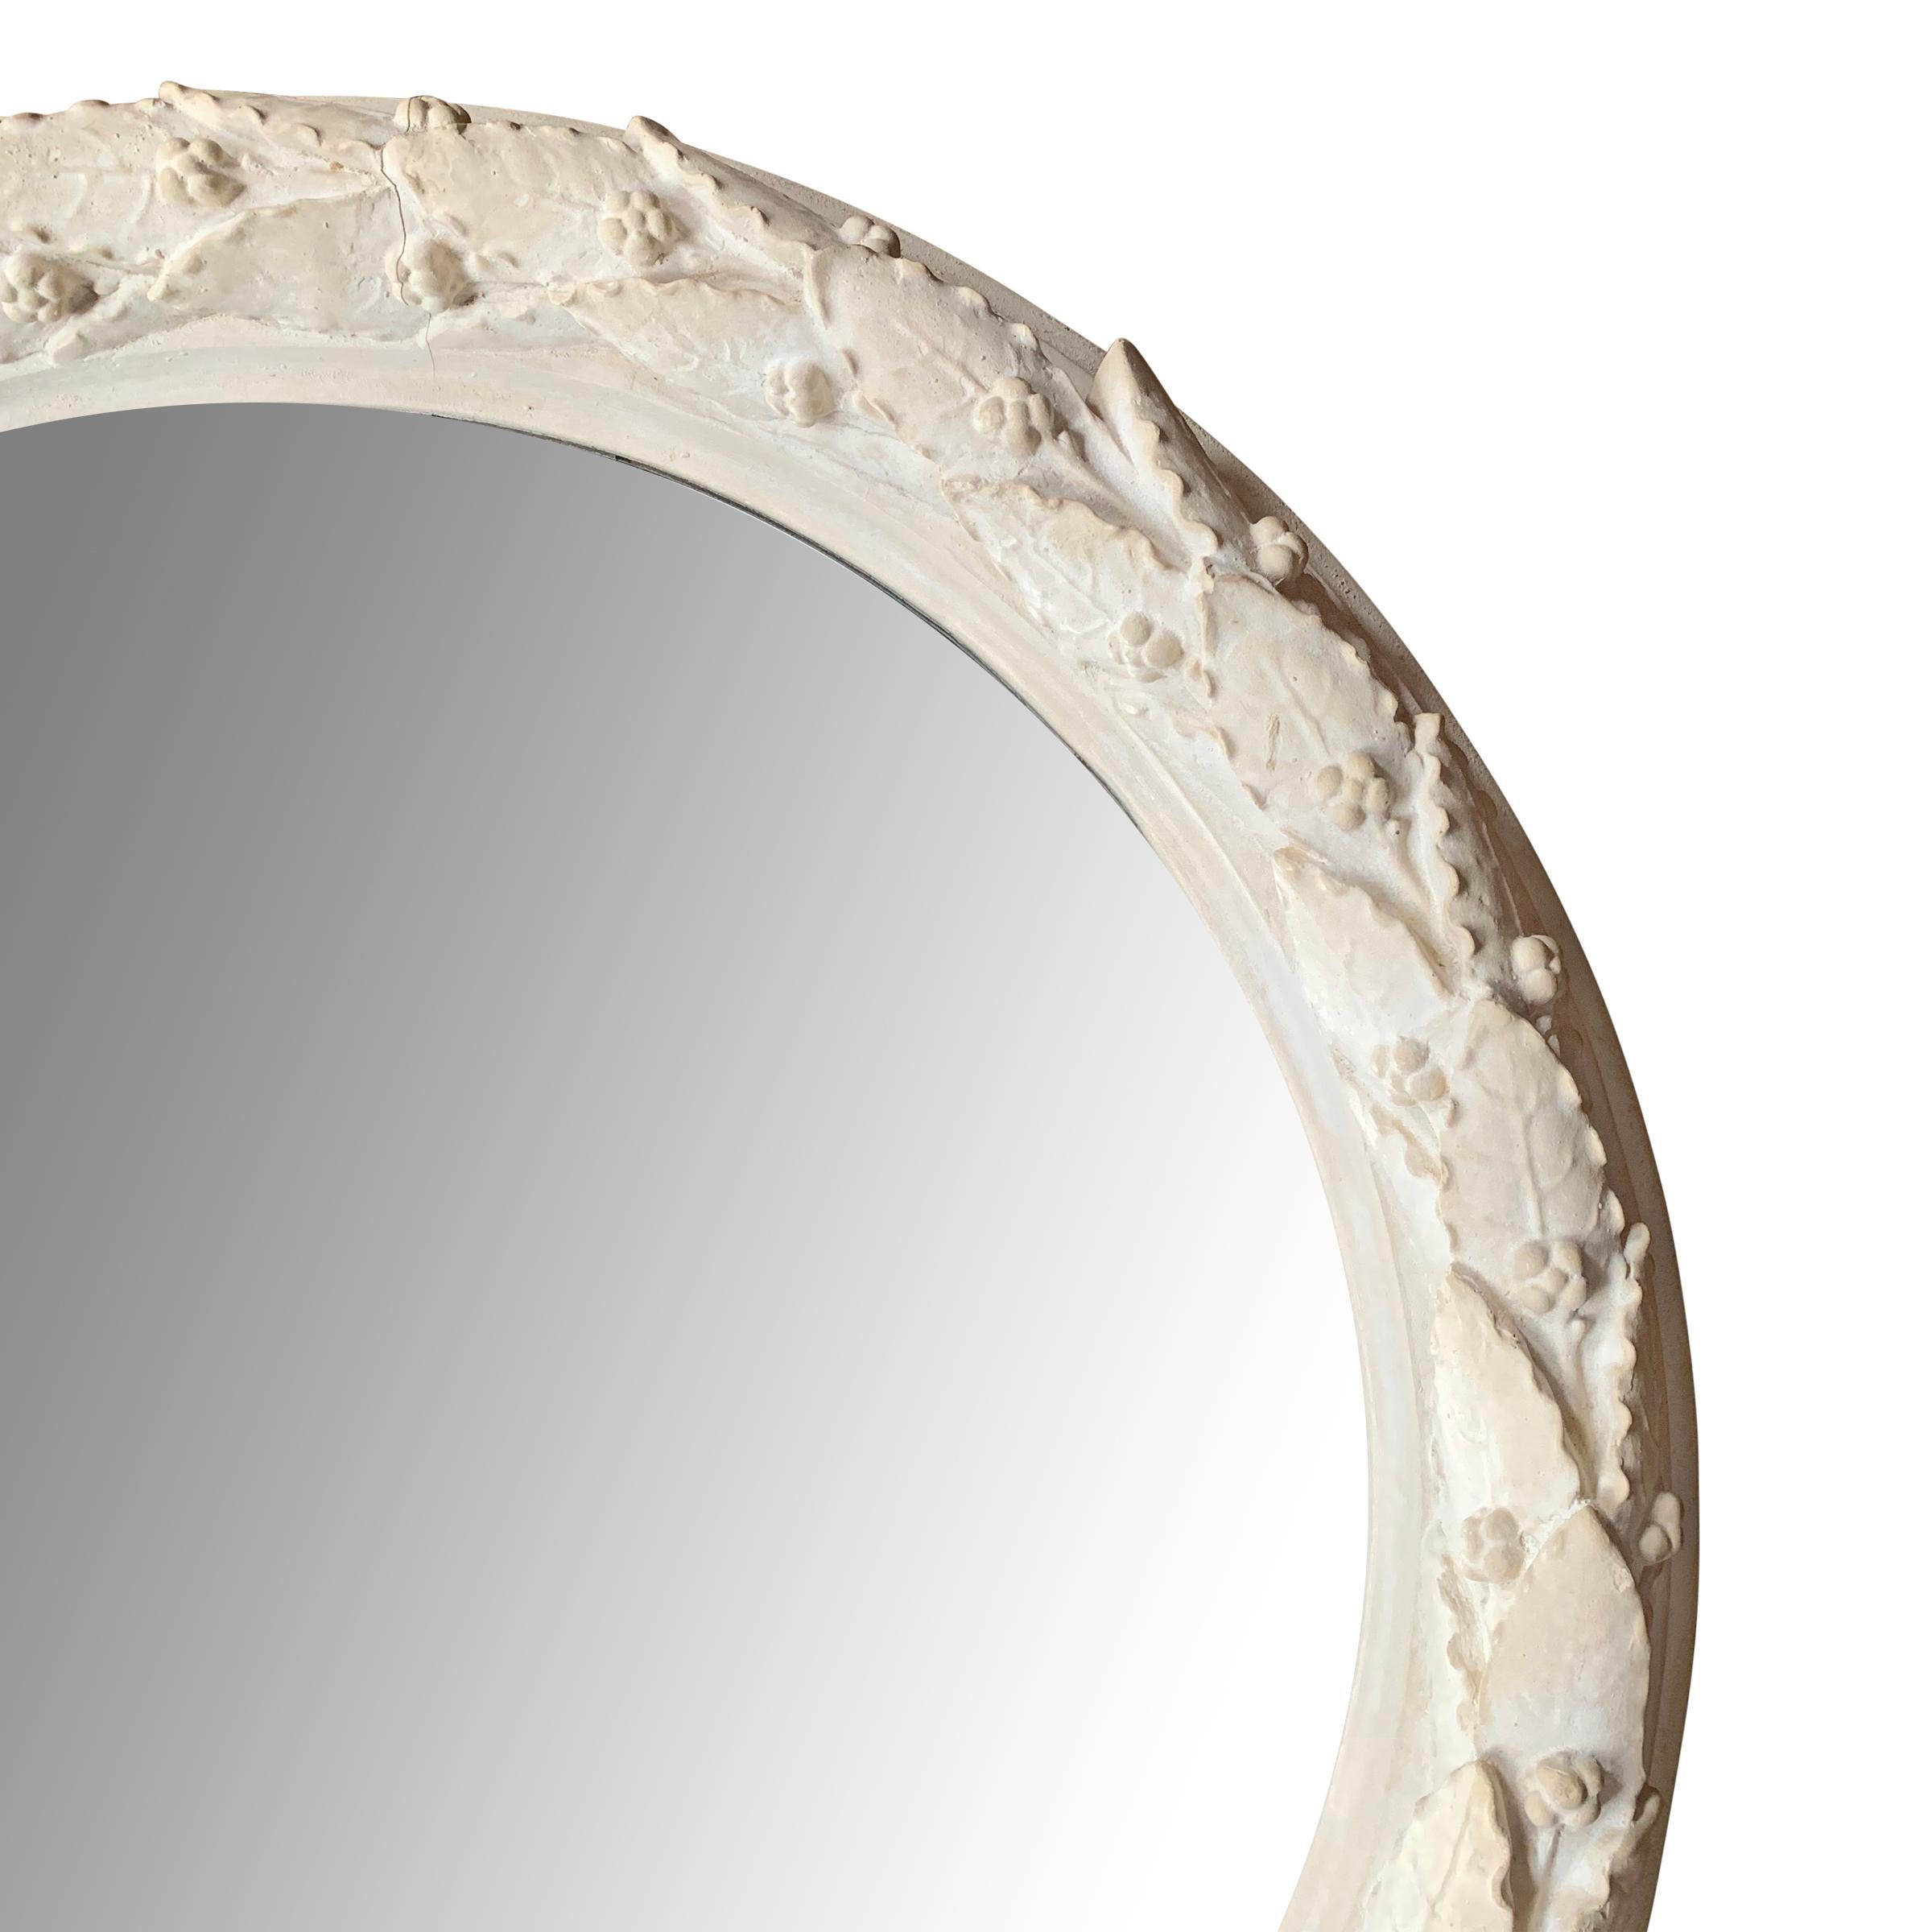 A chic mid-20th century American neoclassical style round mirror with a cast laurel wreath frame. Wonderfully sculptural!